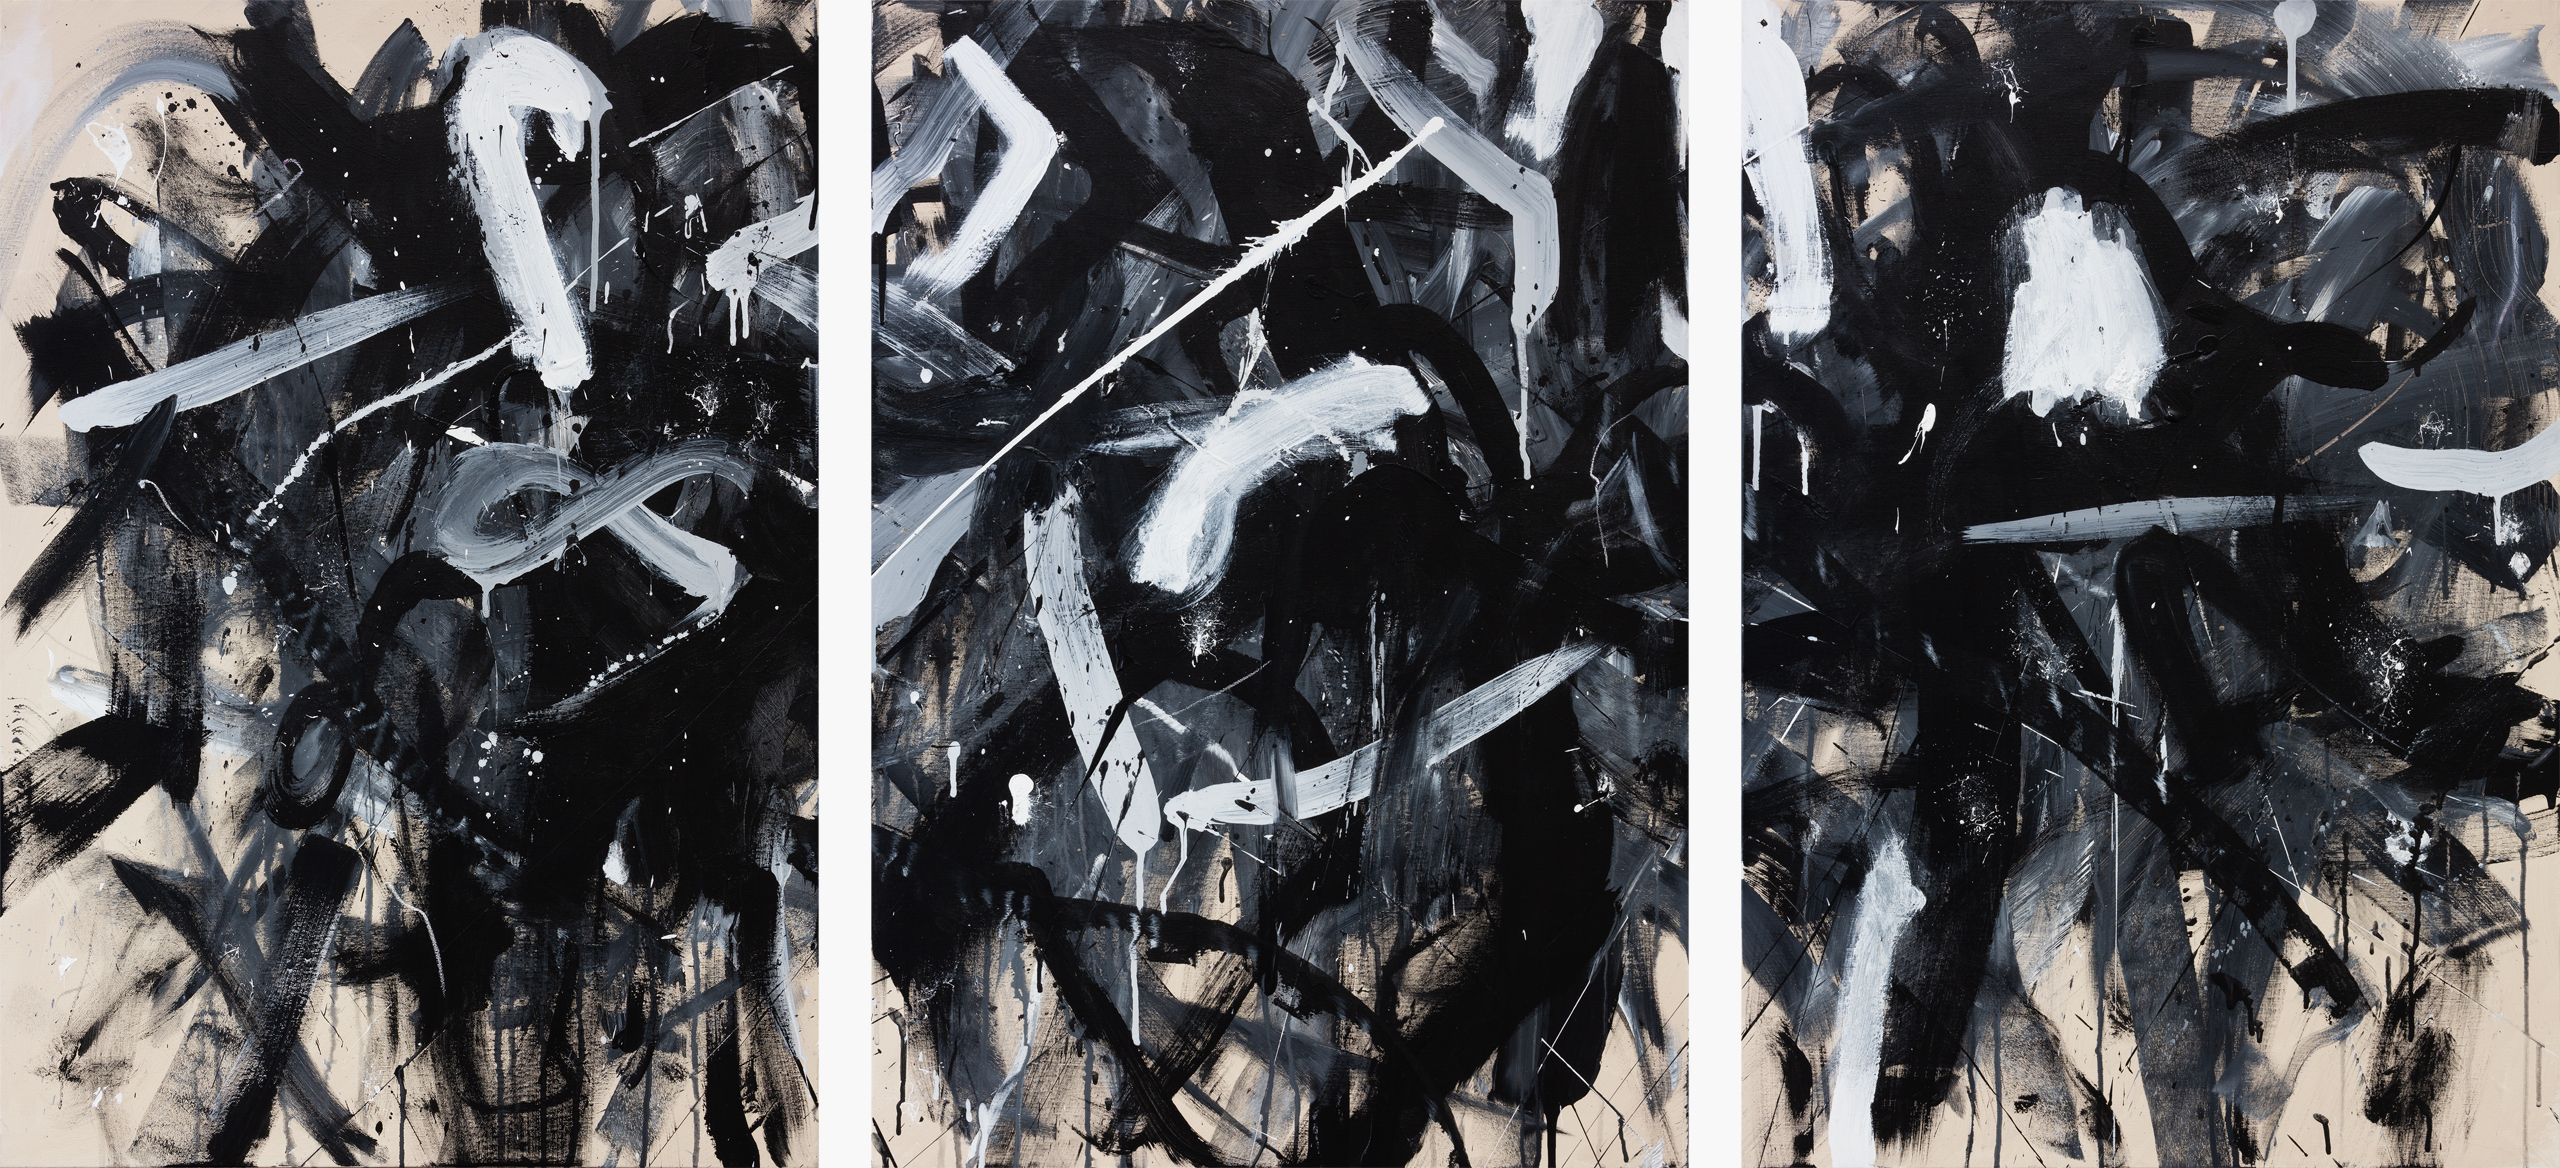 Black and white n. 3-4-5, 2023 | Triptych, Acrylic on canvas, 100 x 210 cm